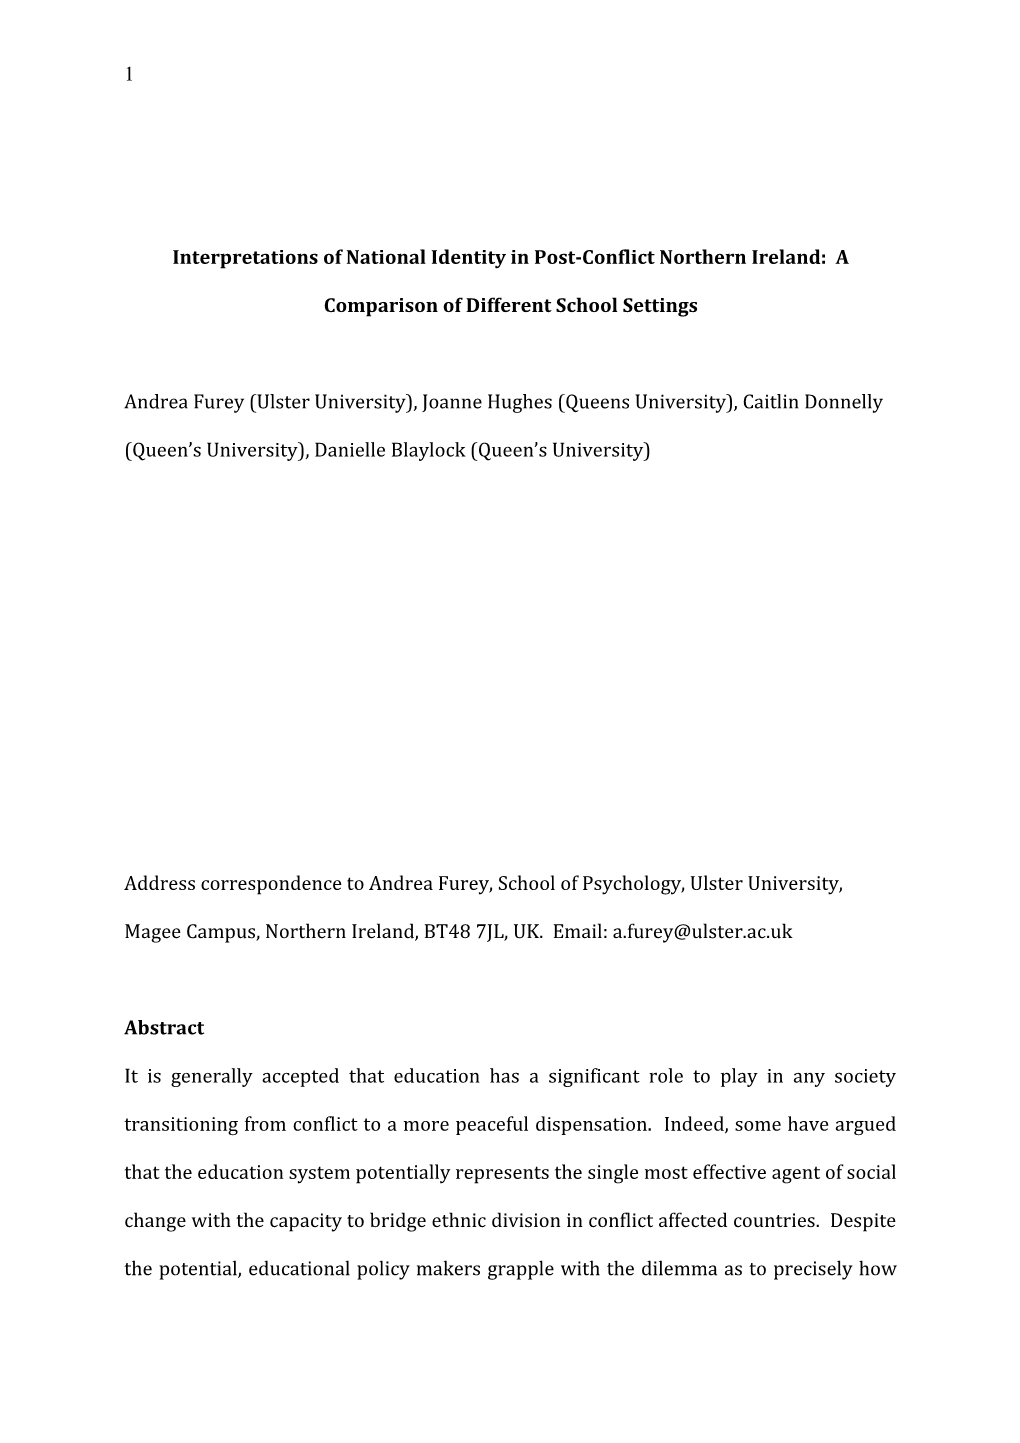 Interpretations of National Identity in Post-Conflict Northern Ireland: a Comparison Of